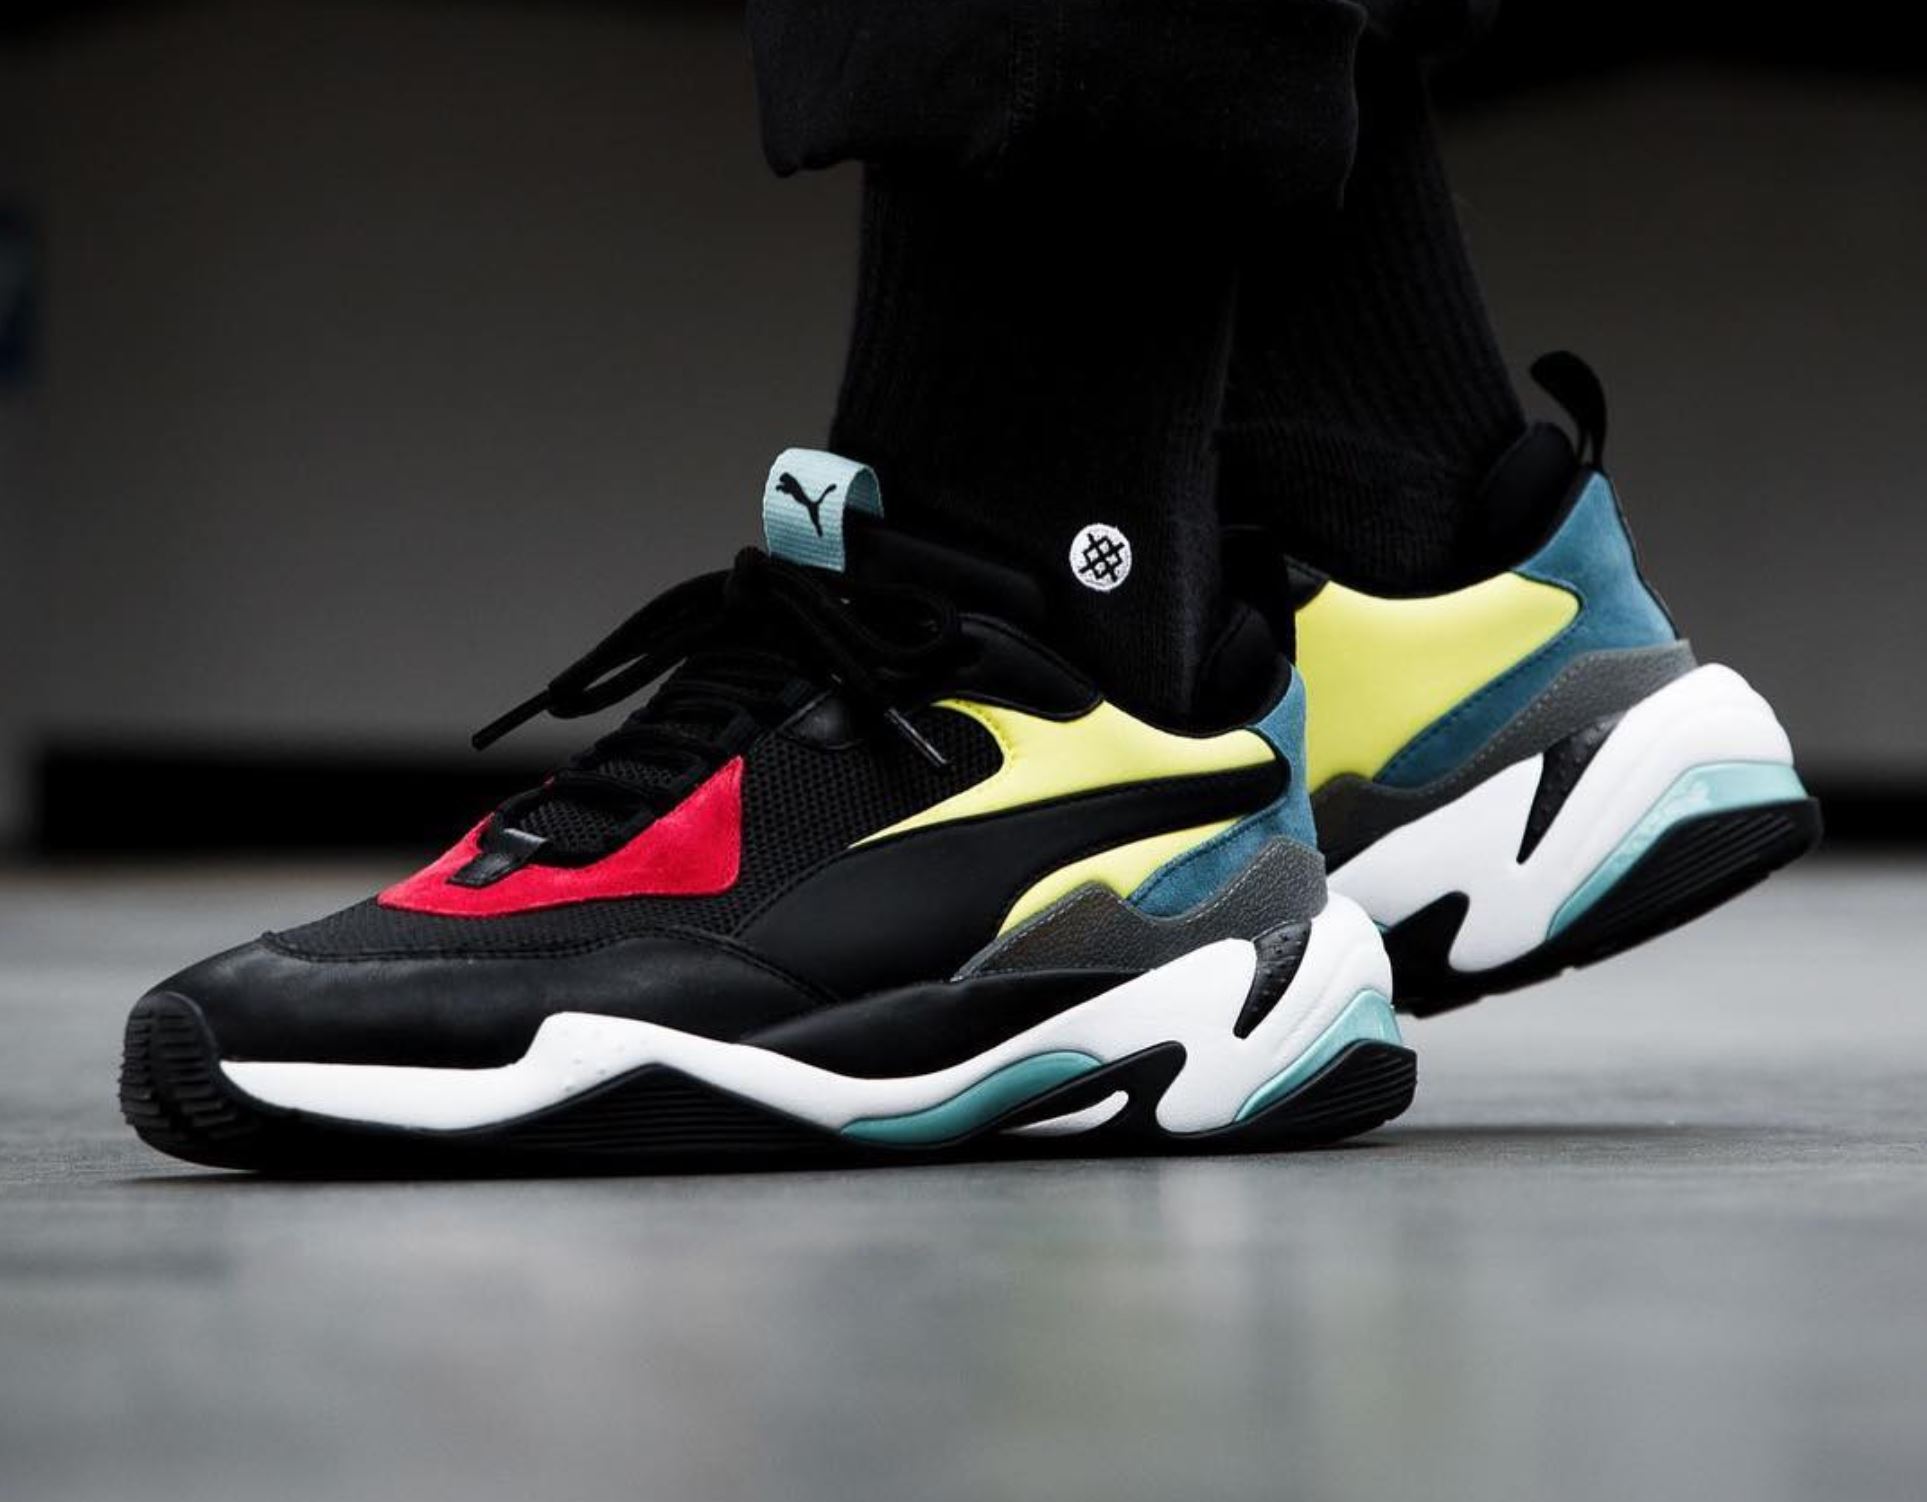 The Puma Thunder Spectra is Very and It's Coming in 2018 - WearTesters